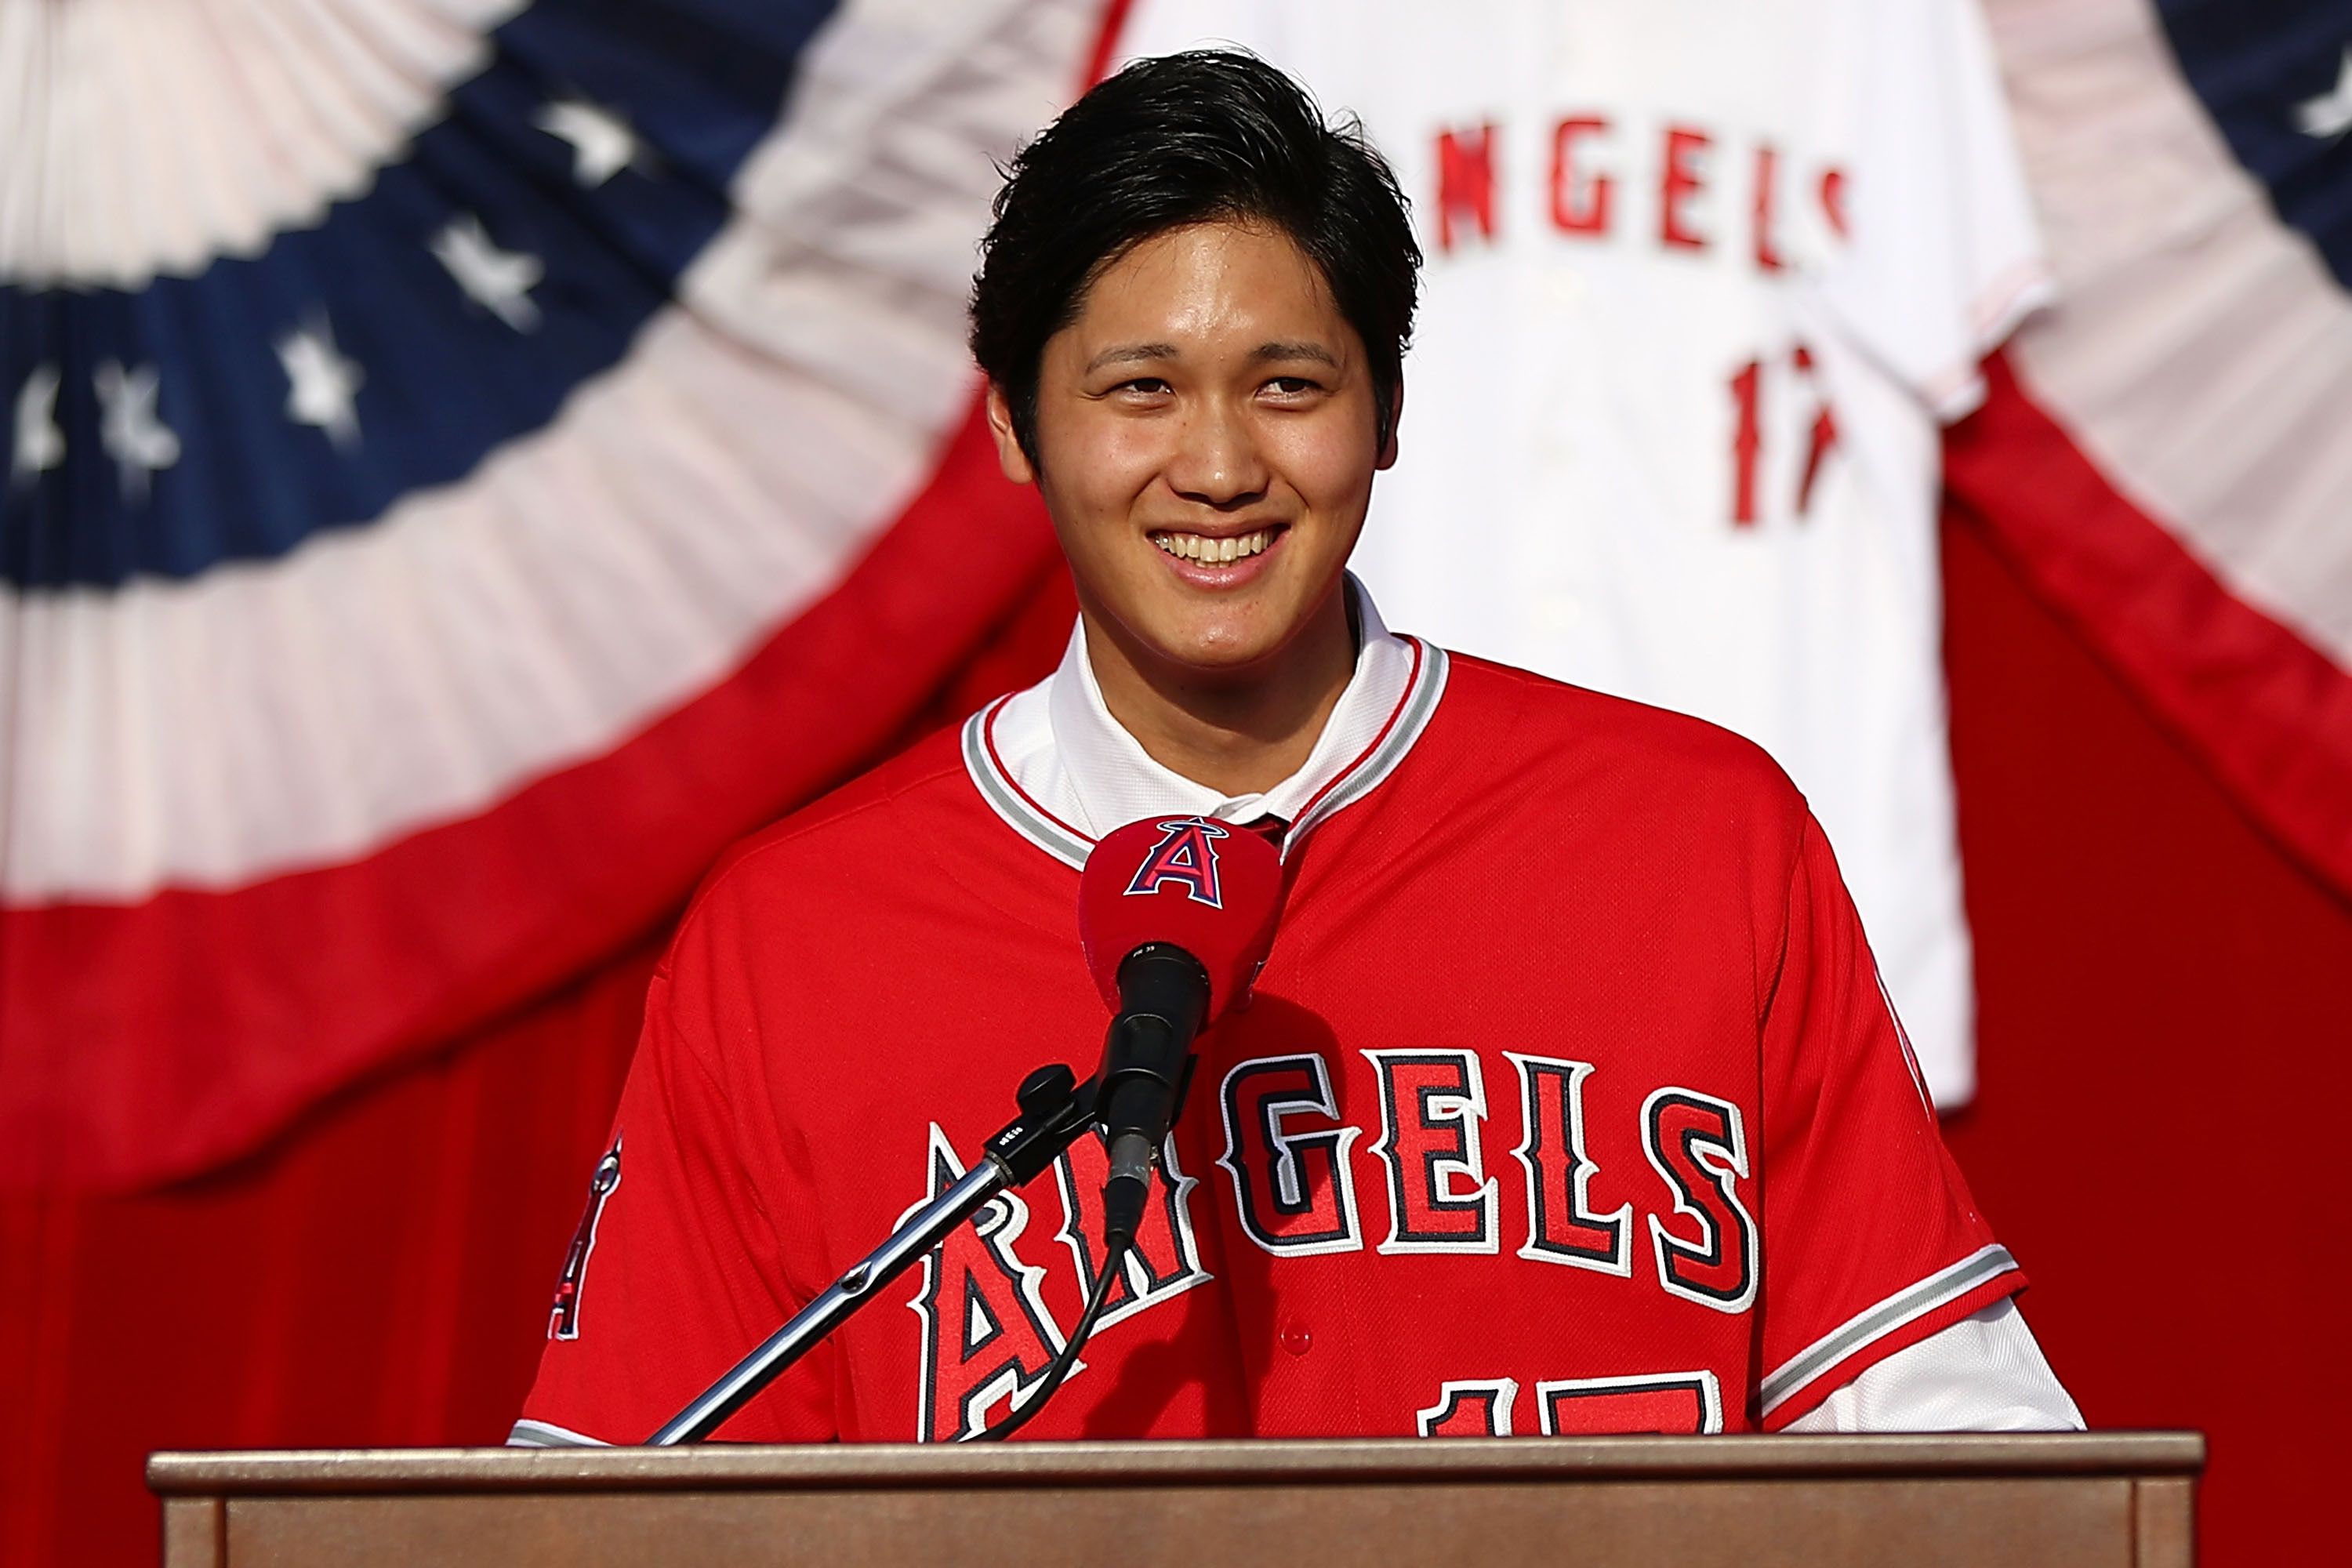 Shohei Ohtani won't pitch for rest of season because of a torn elbow  ligament, Angels GM says – KGET 17